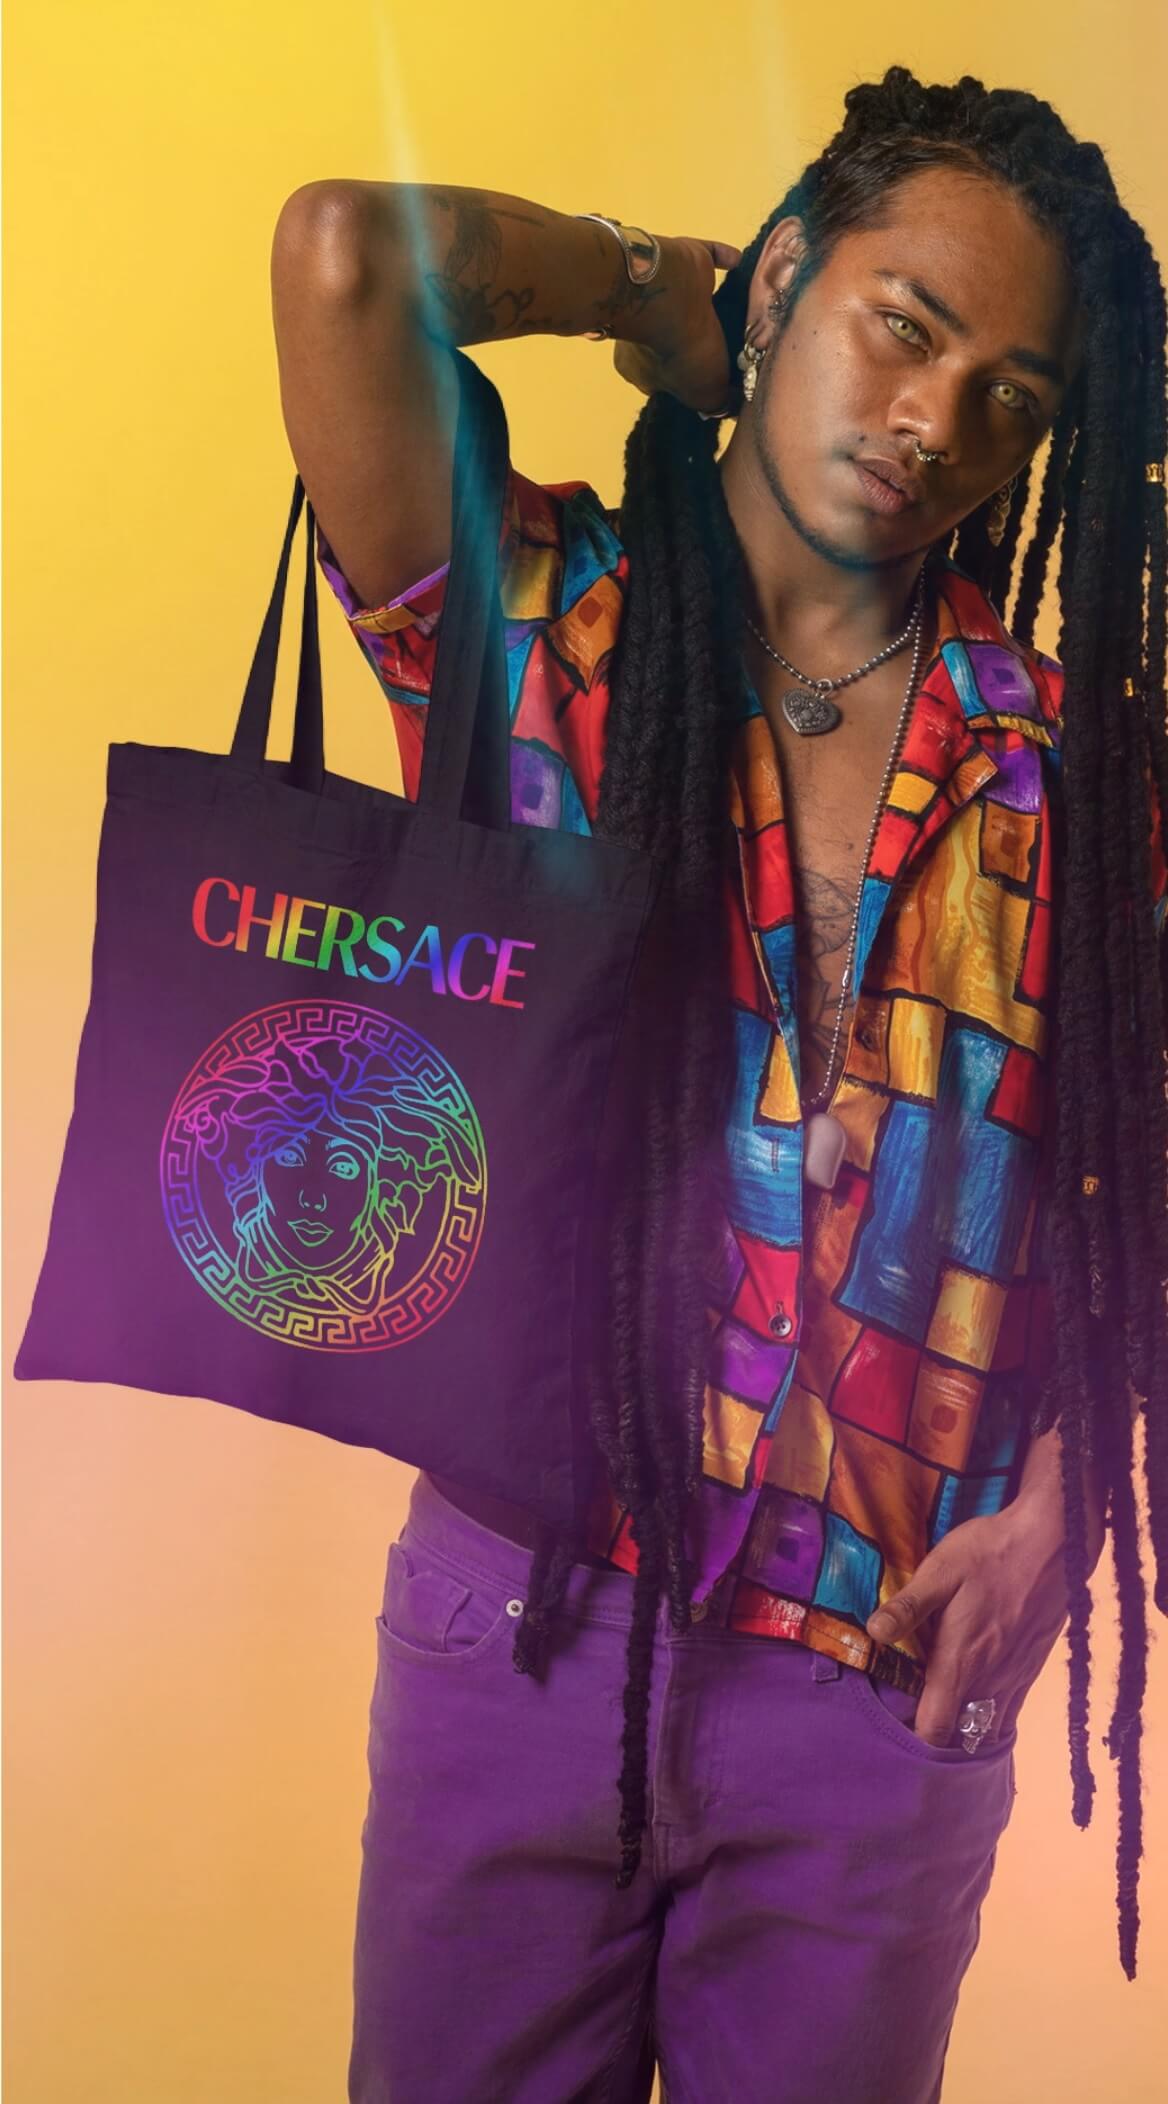 CHERSACE by Gllamazon tote bag video featuring five members of the LGBTQ community